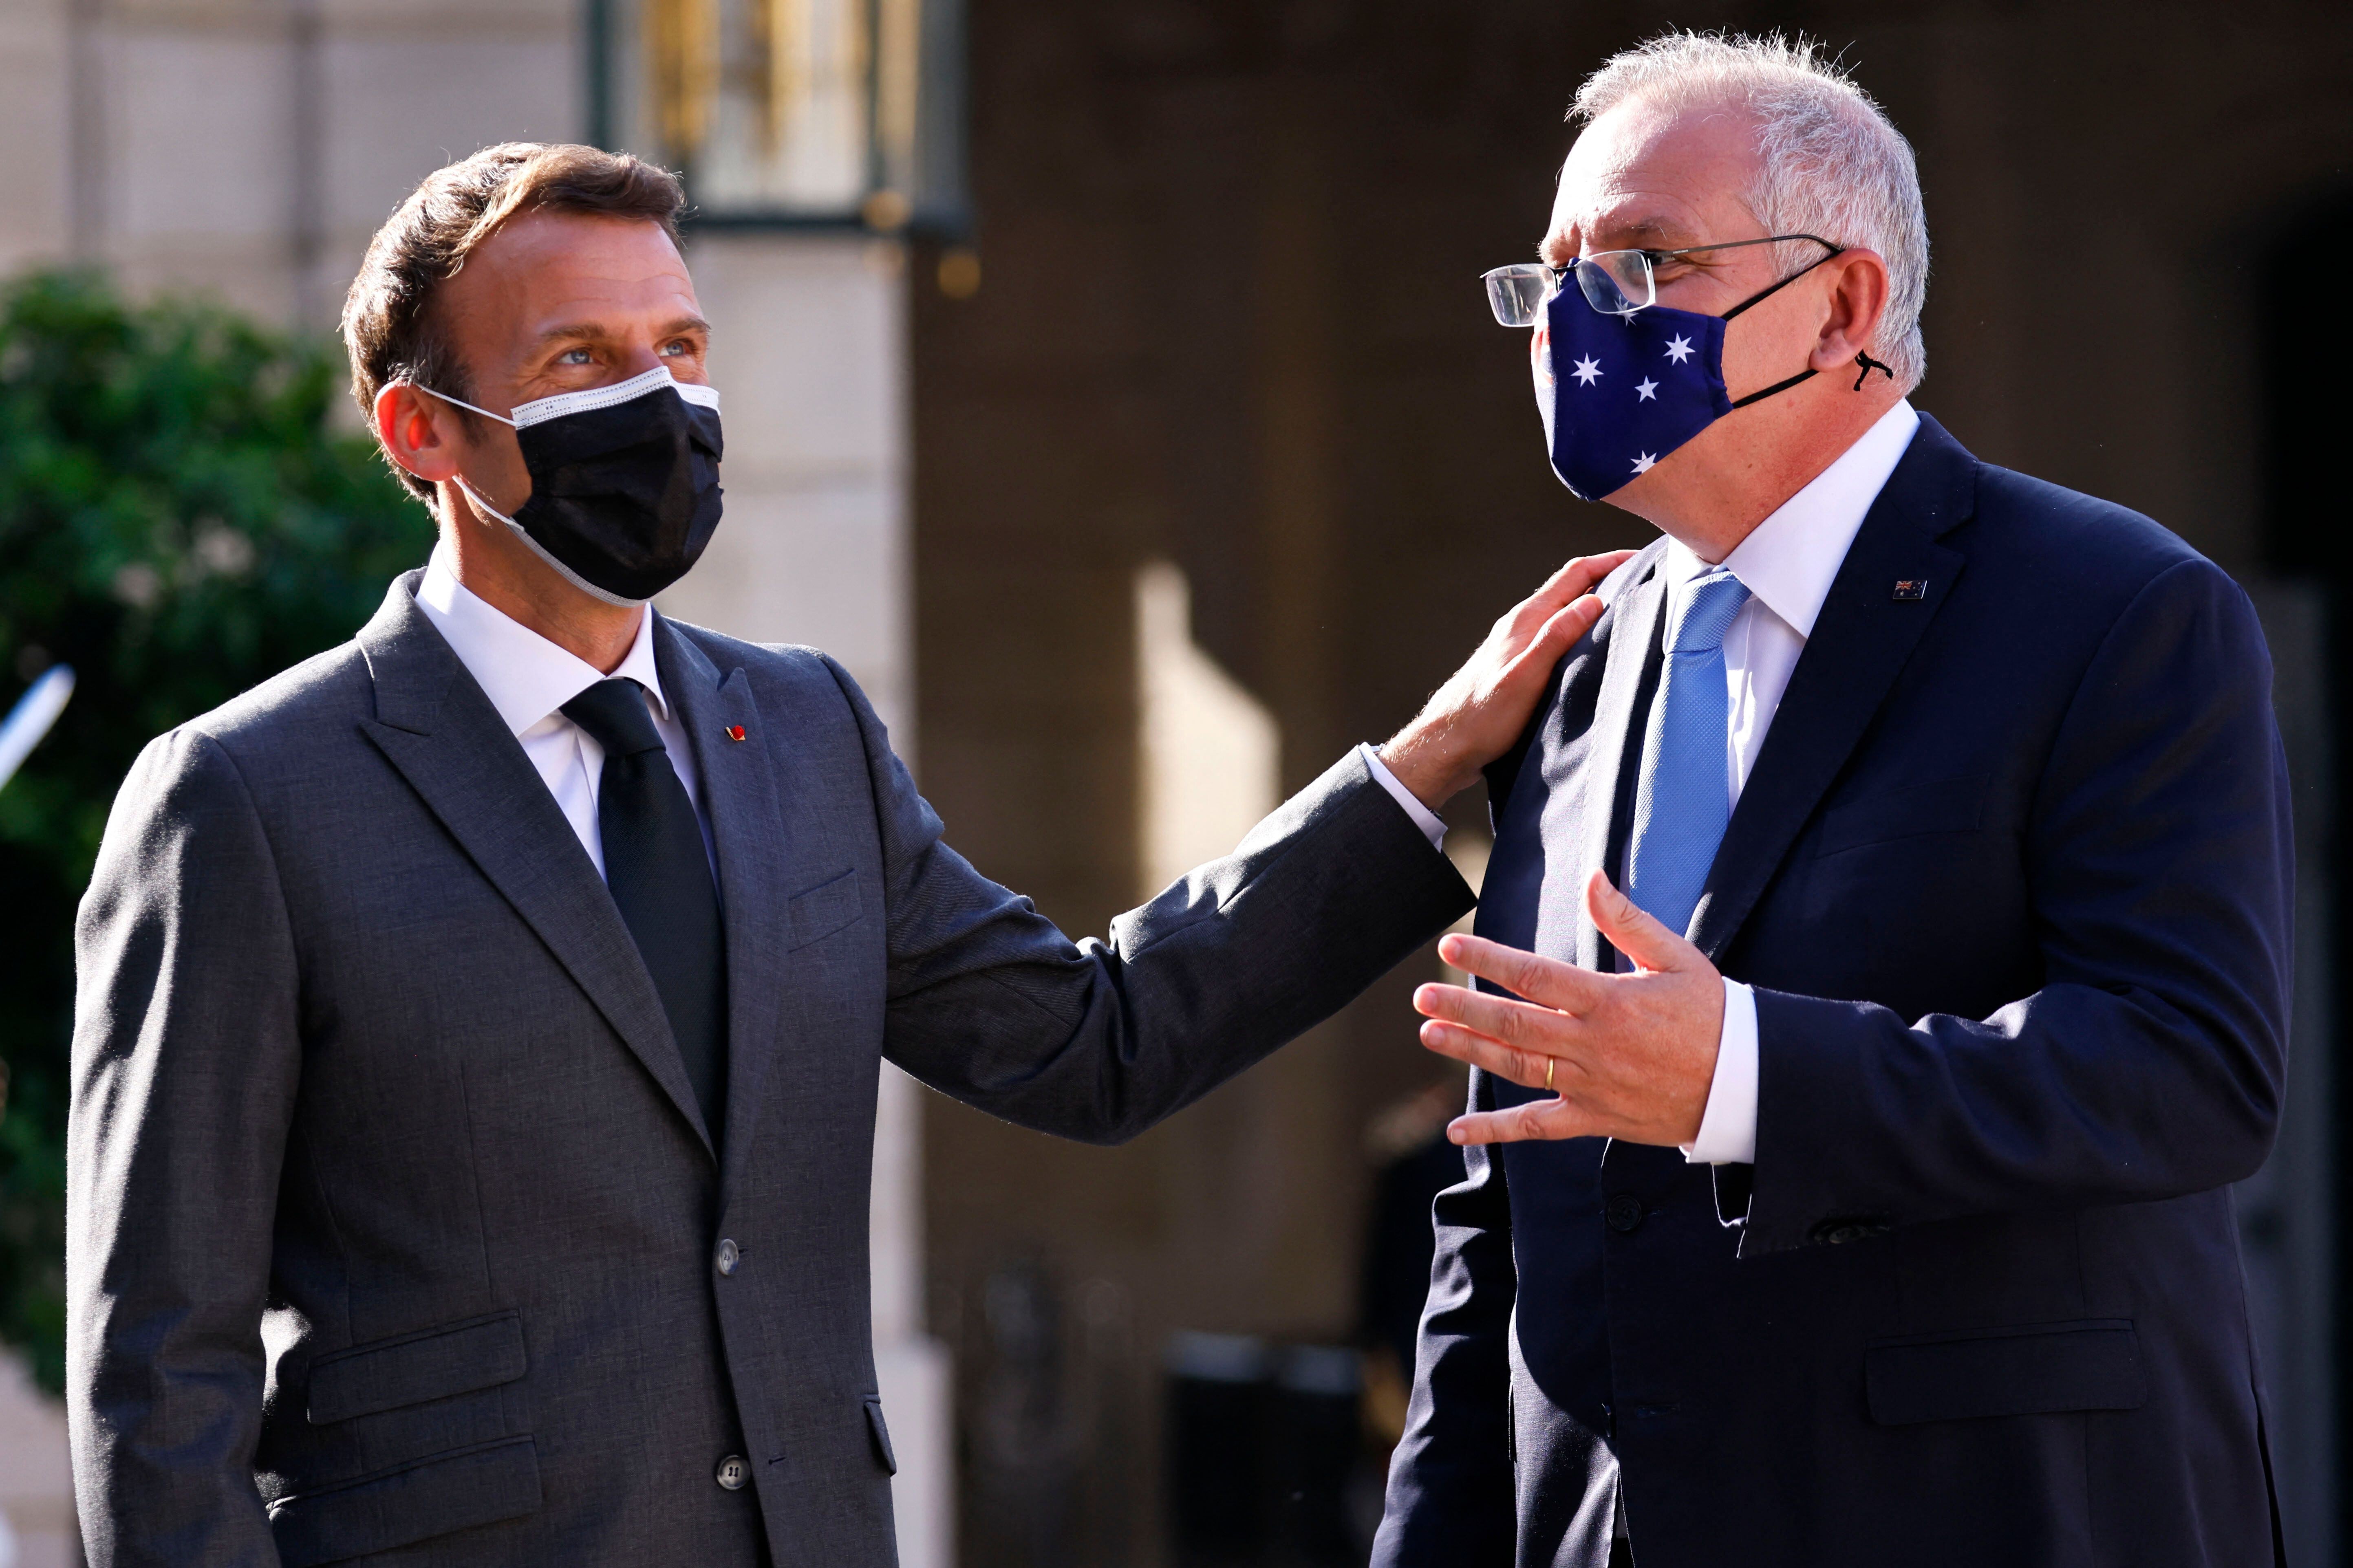 French President Emmanuel Macron greets Australia’s Prime Minister Scott Morrison at the Elysee Palace on June 15, 2021. Photo: AFP